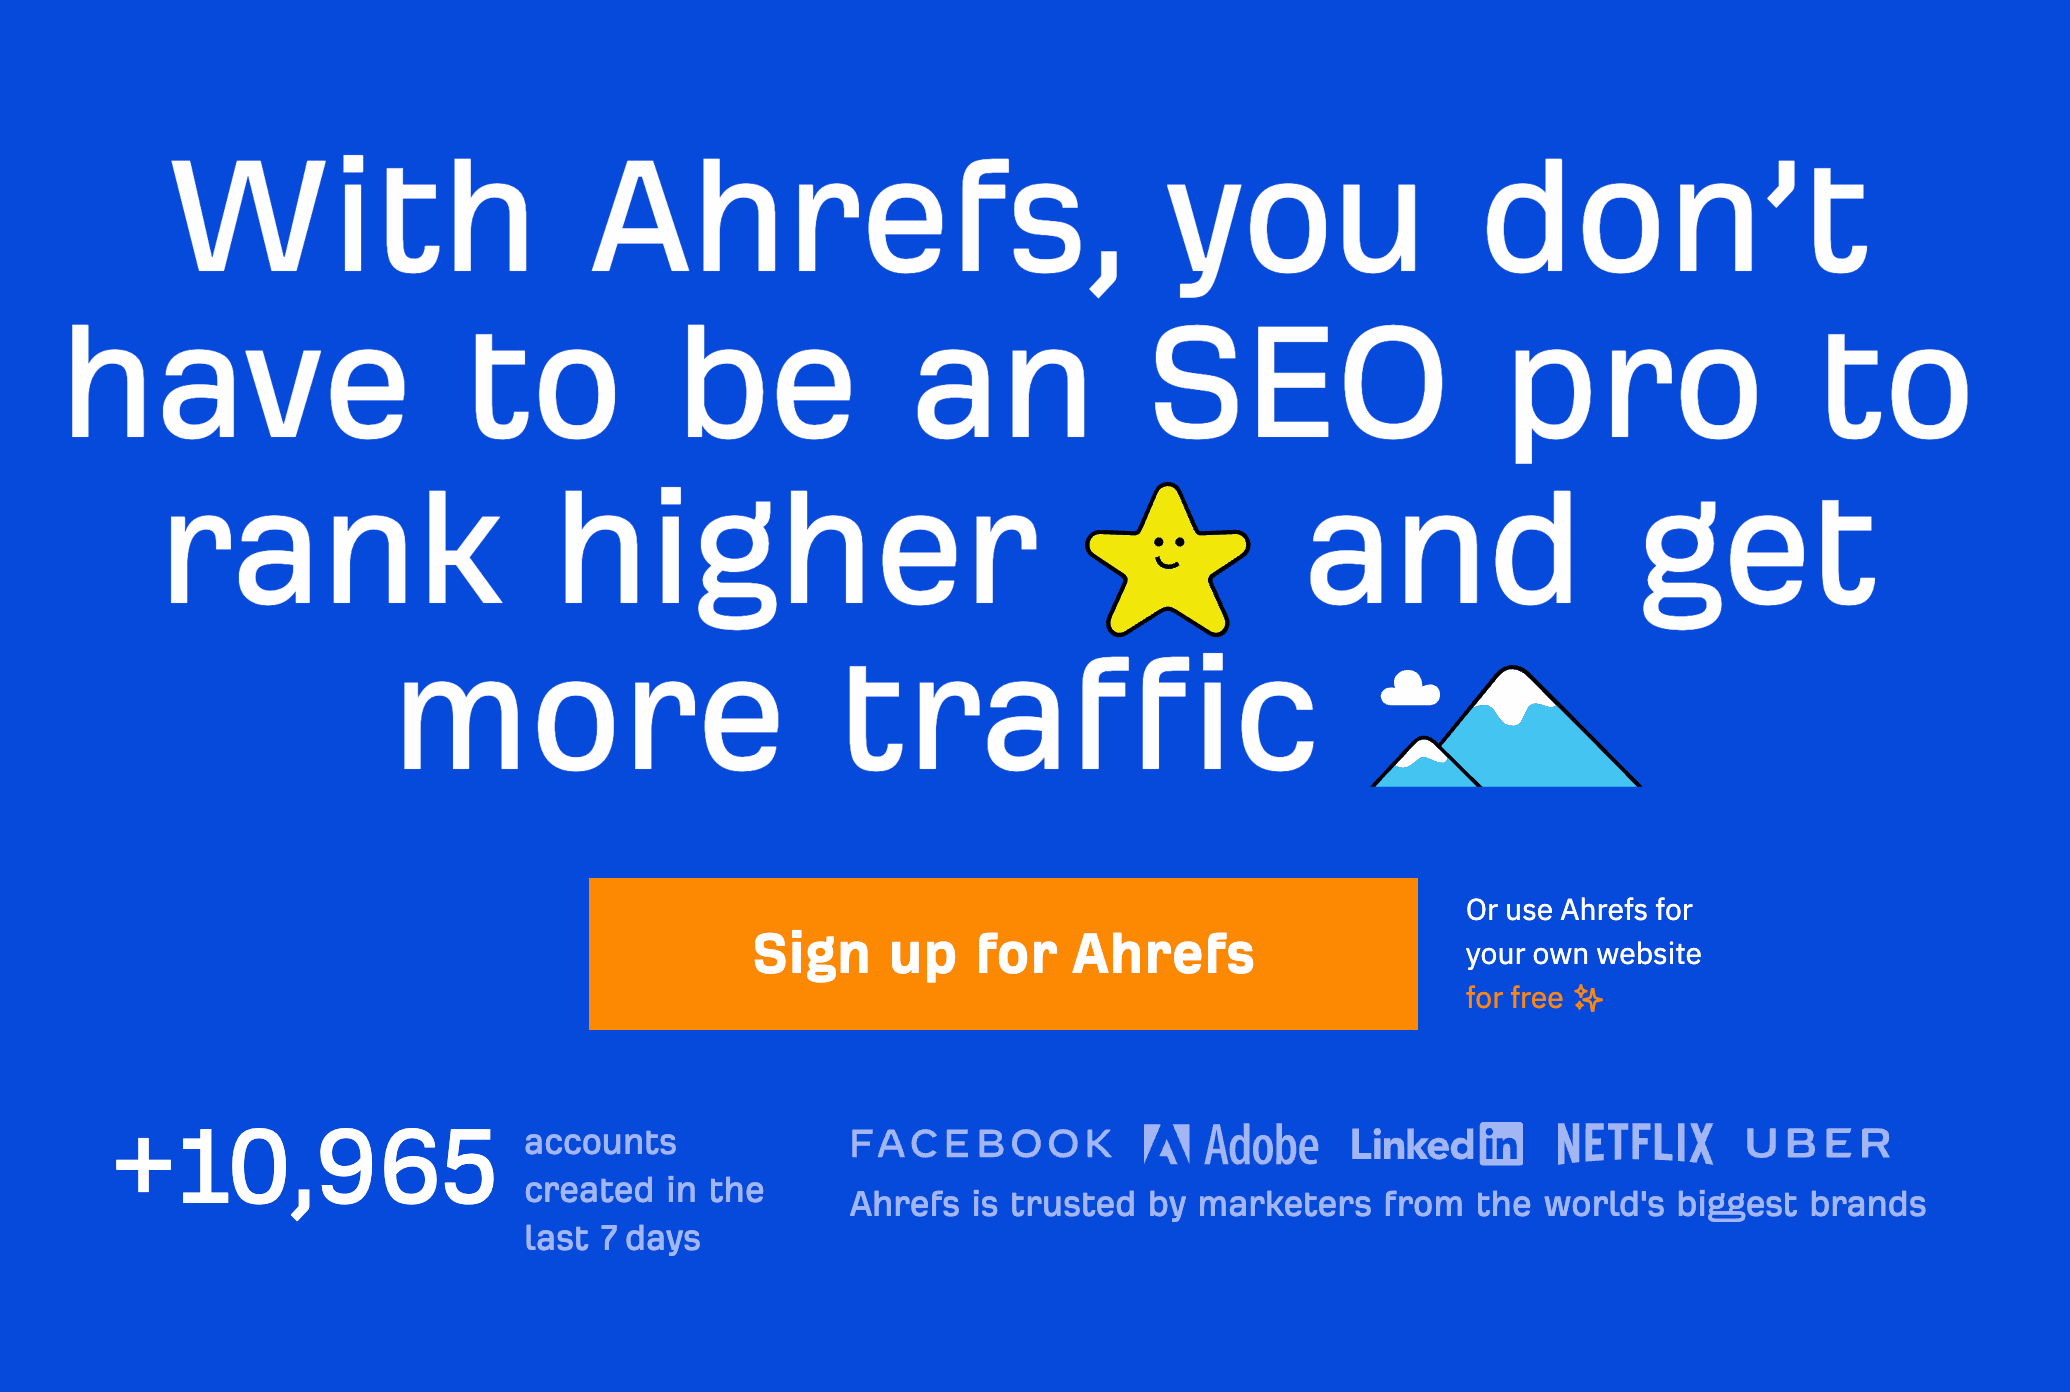 Ahrefs' home page